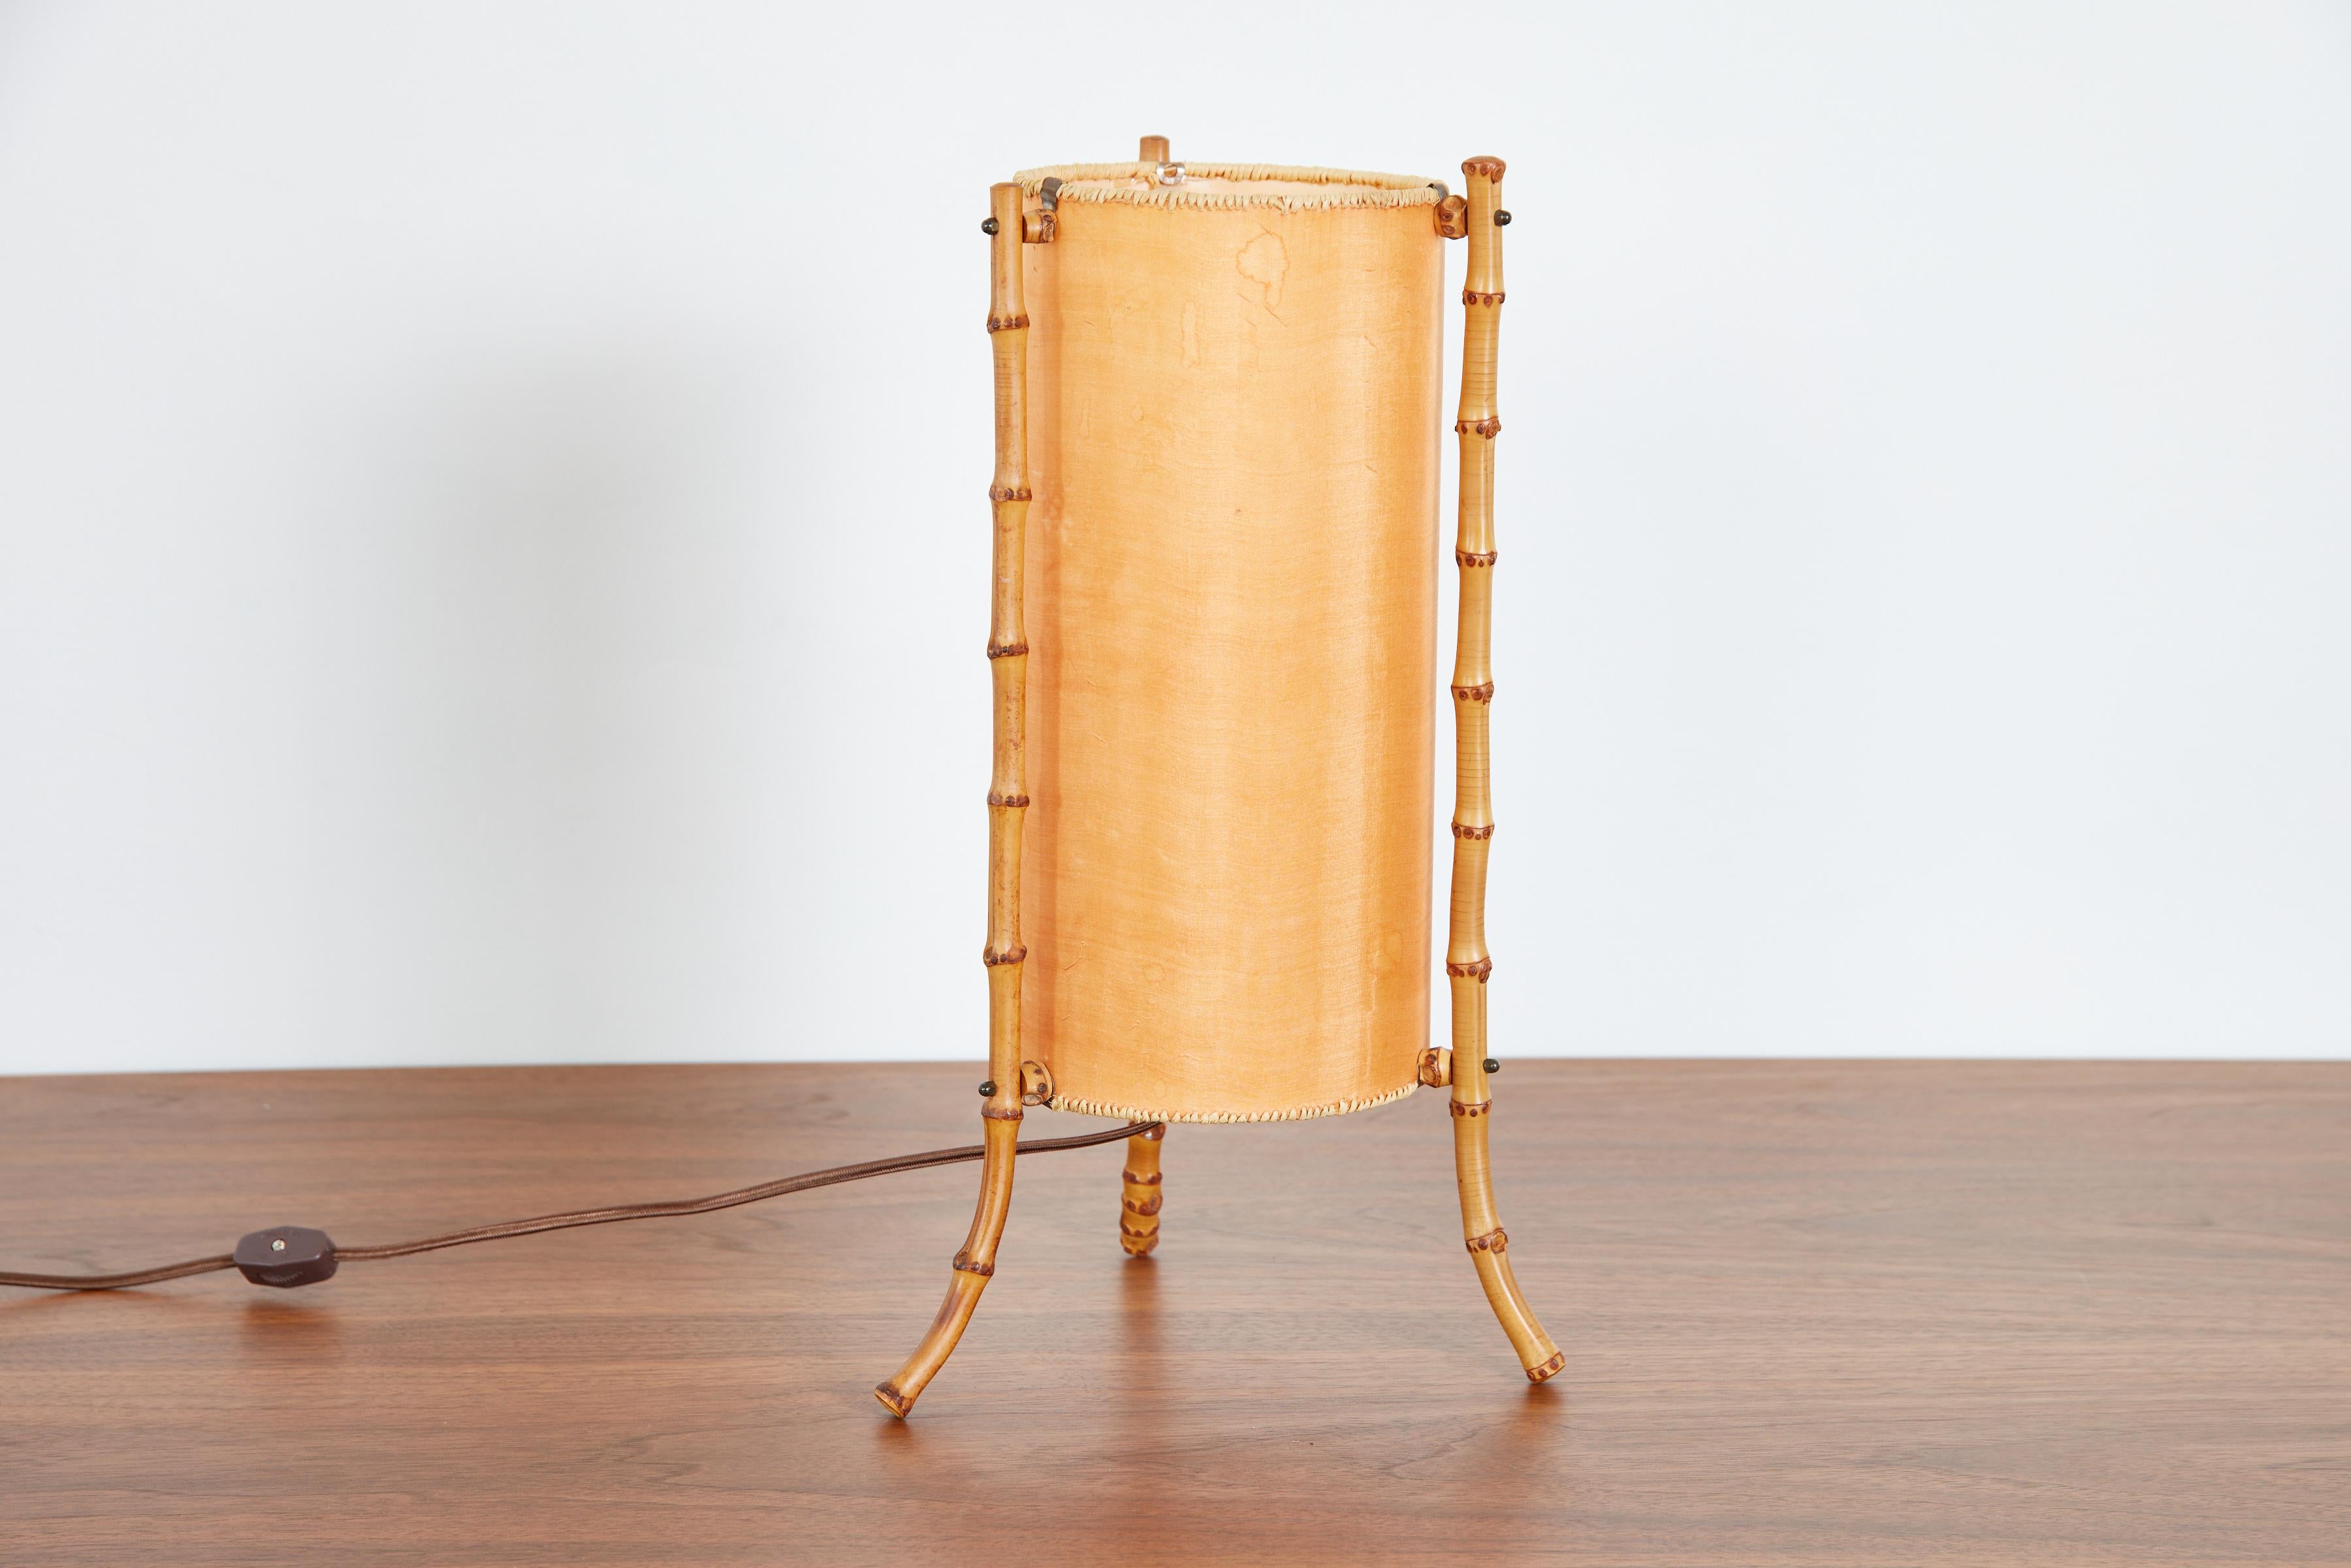 Gorgeous table lamp by Jacques Adnet 
Original shade with whipstitching and bamboo frame 
Beautiful patina
Newly rewired